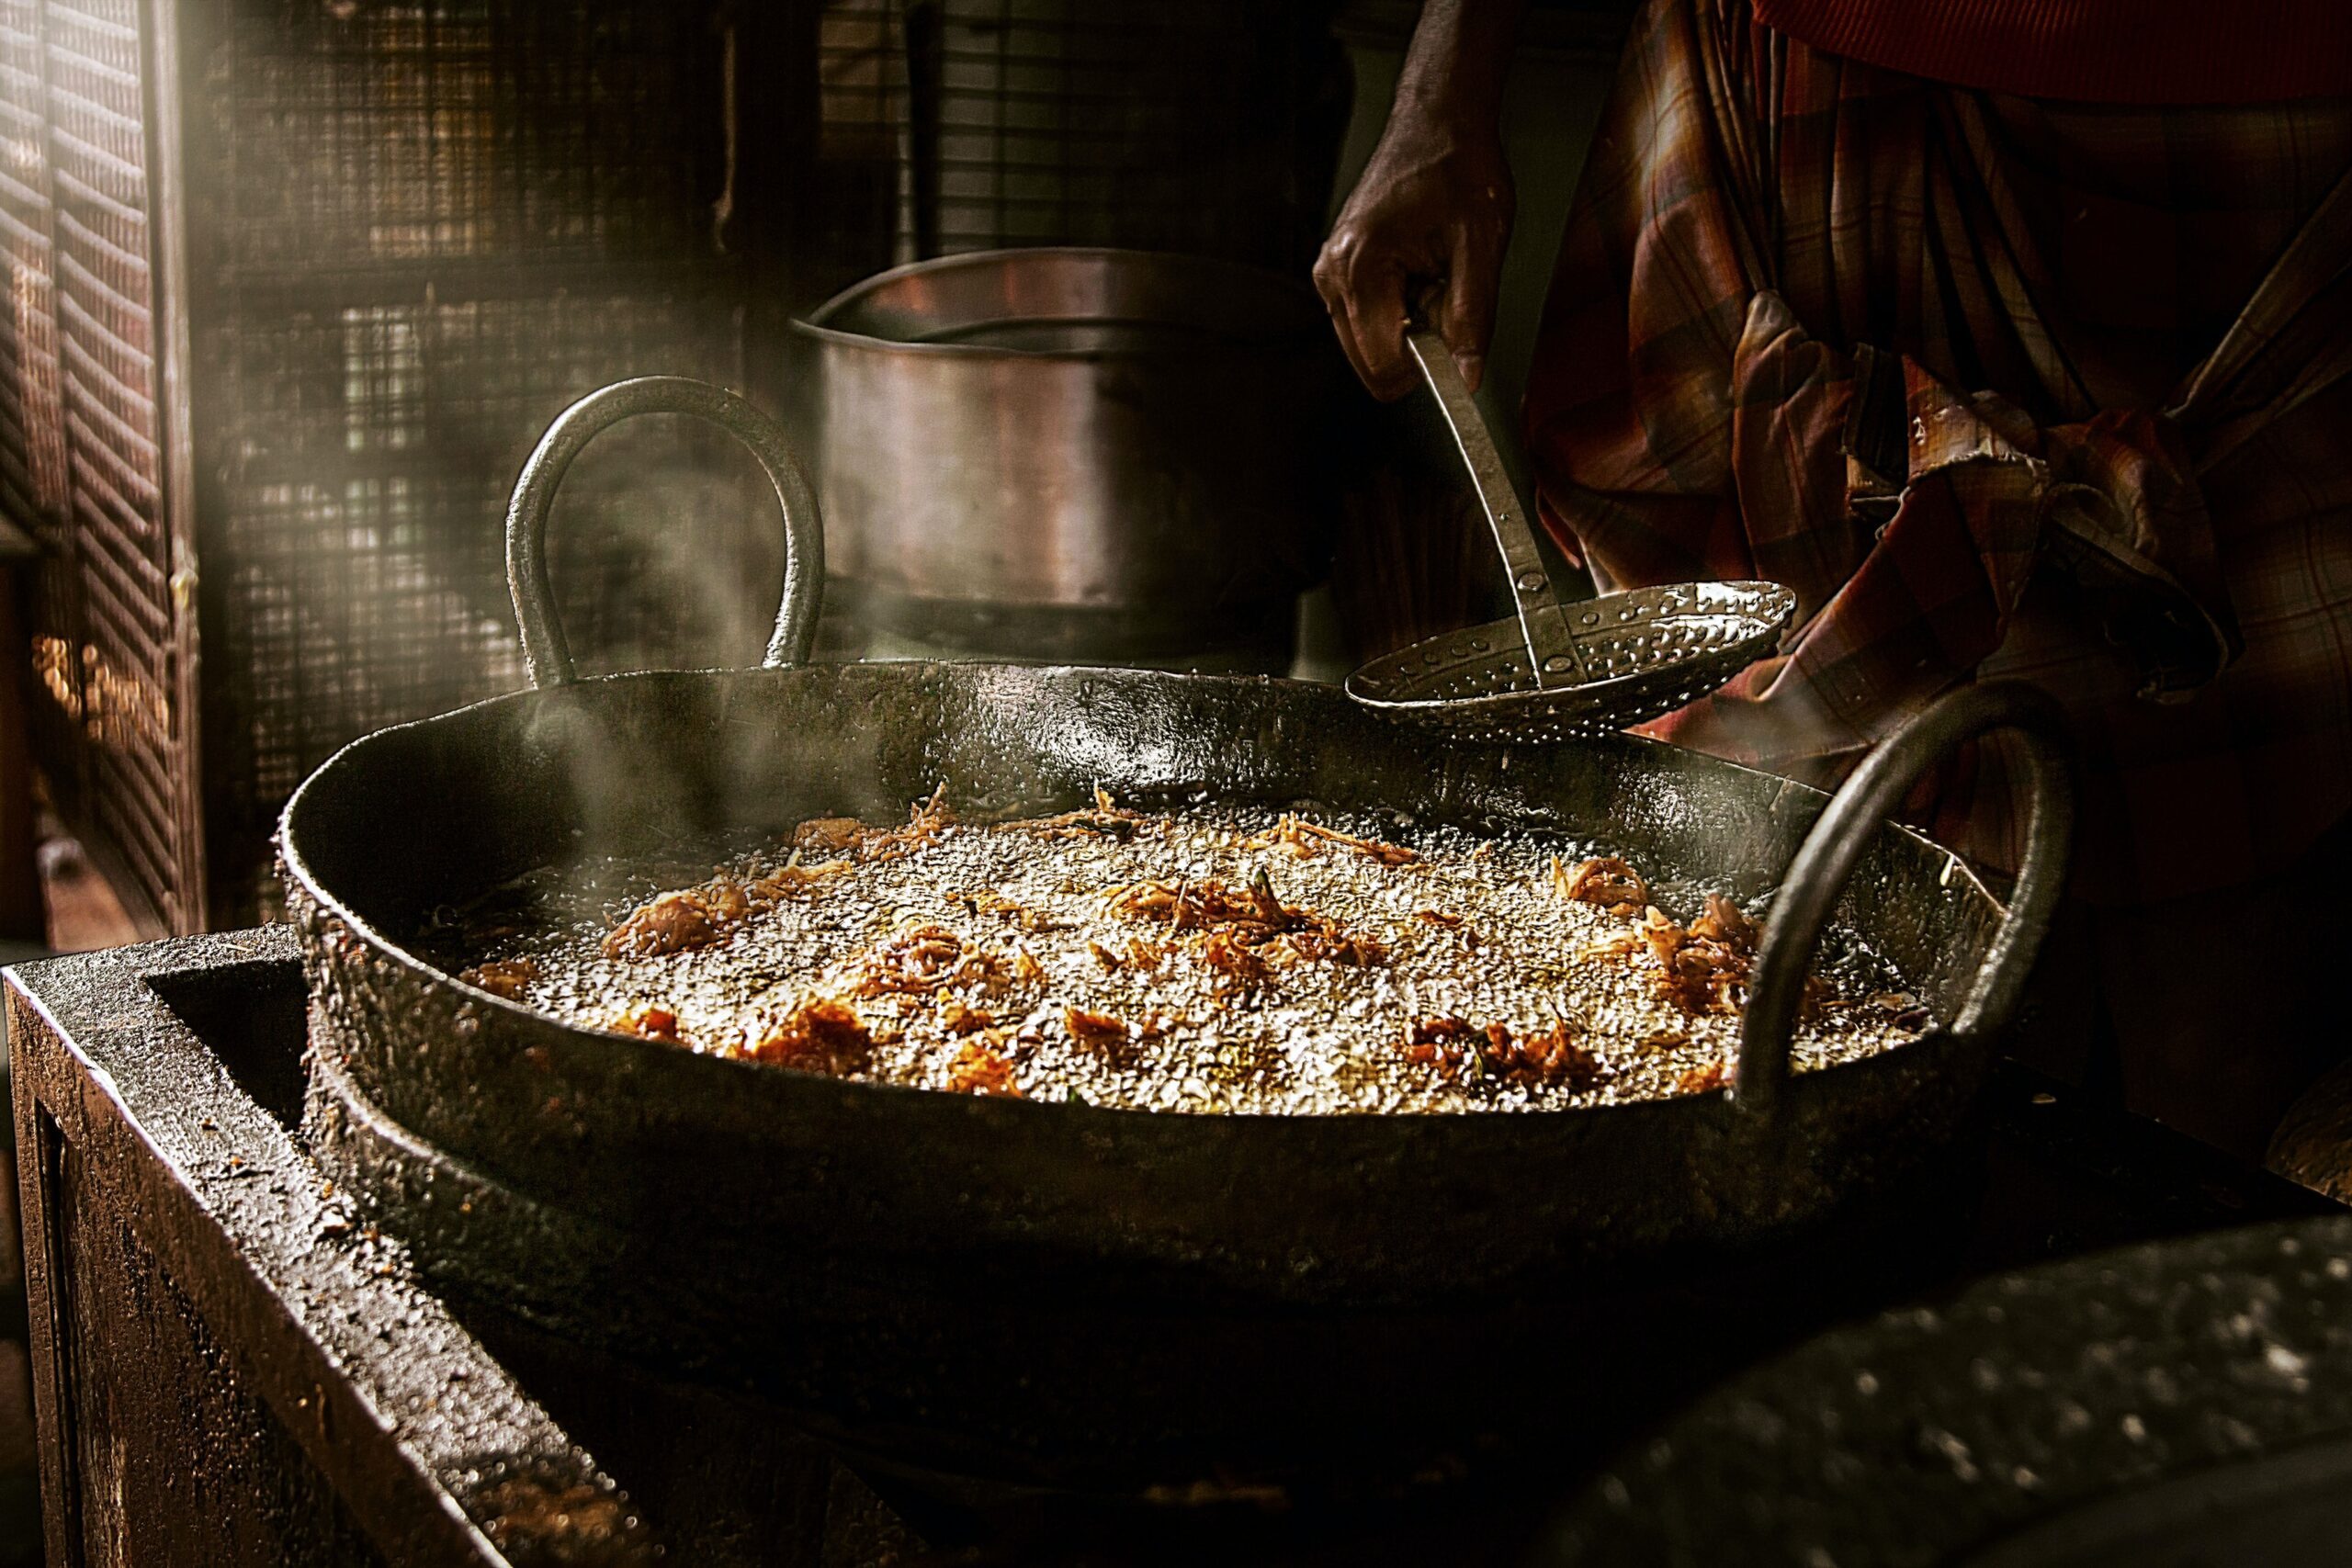 Share A Beloved Indian Street Food Recipe That Youve Mastered In Your Kitchen.